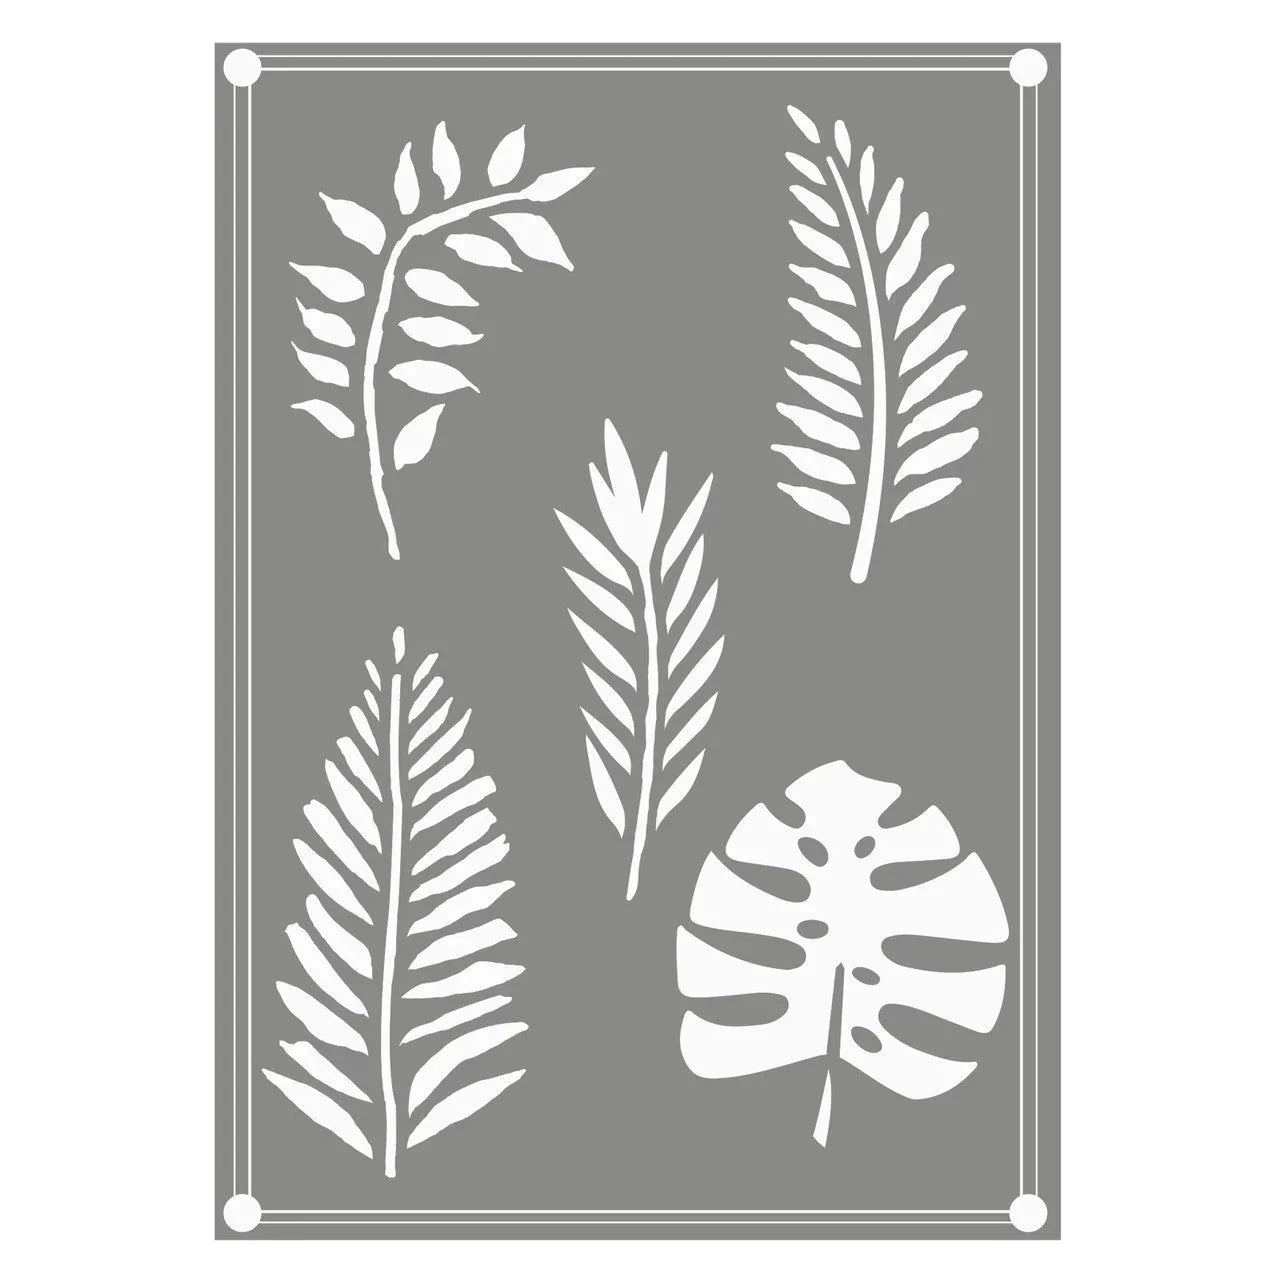 Couture Creations - Earthy Delights Mixed Leaves Stencil 1